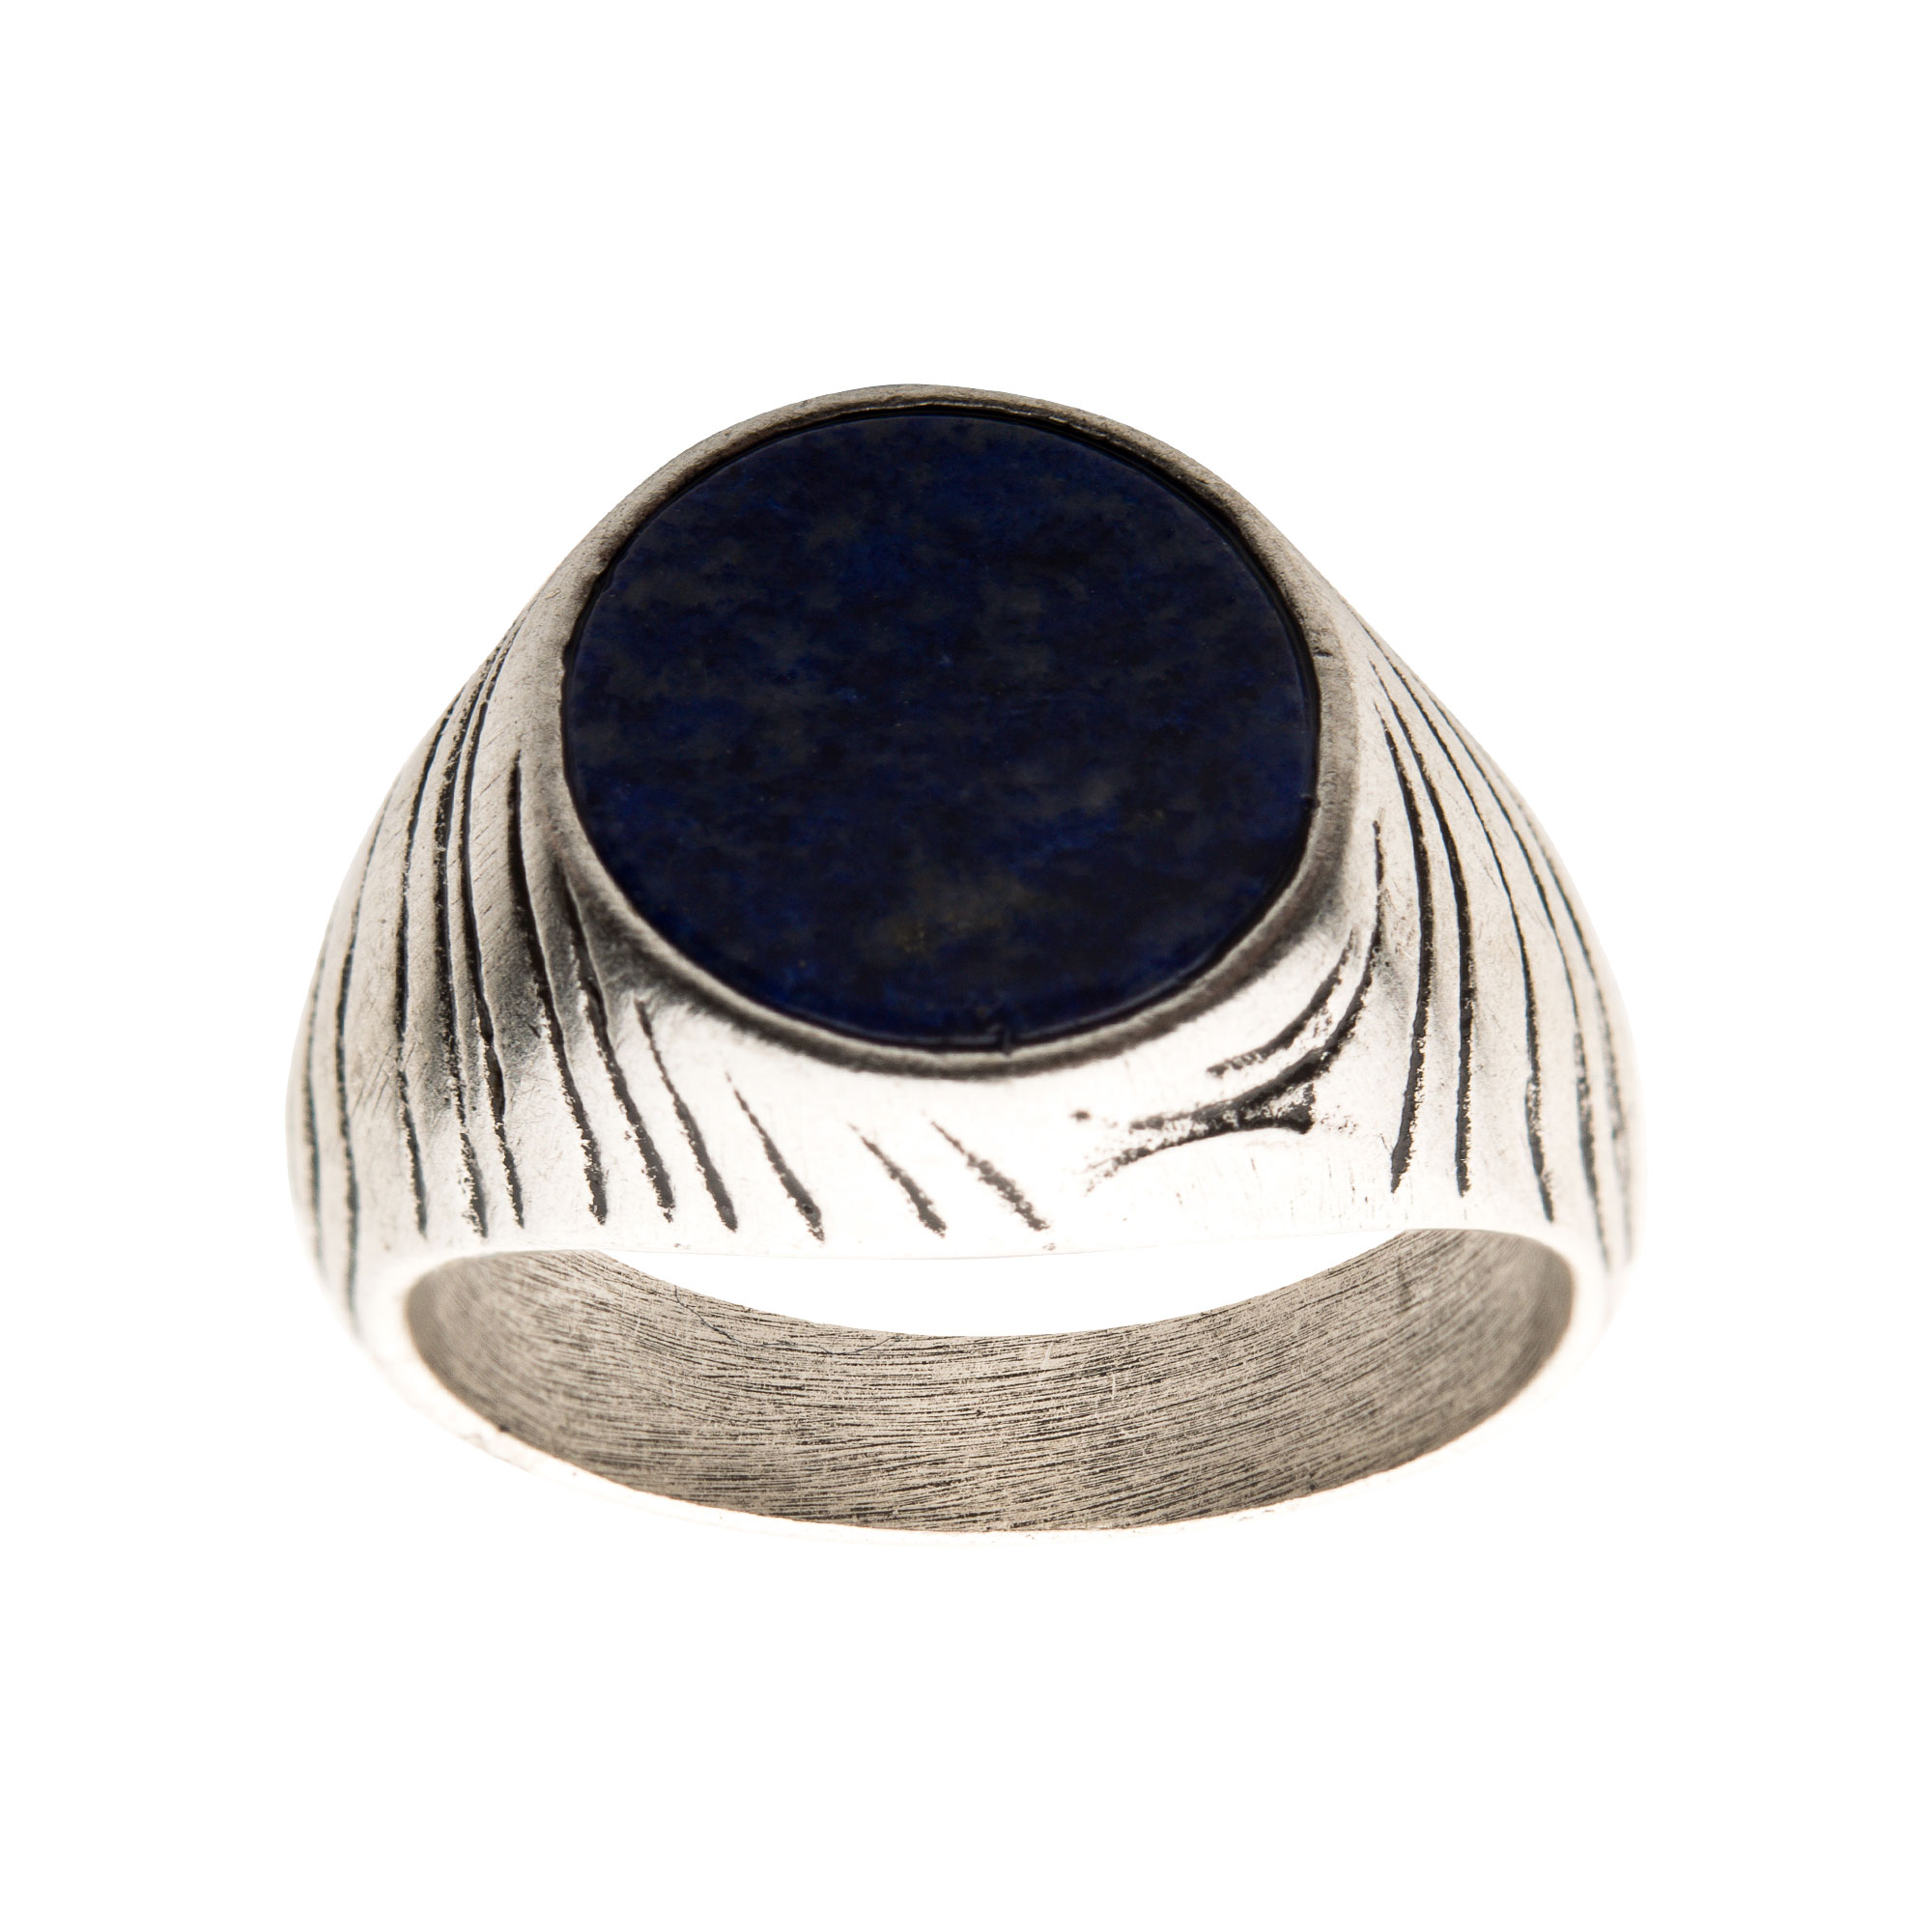 Stainless Steel Silver Plated with Lapis Stone Ring Image 2 Selman's Jewelers-Gemologist McComb, MS